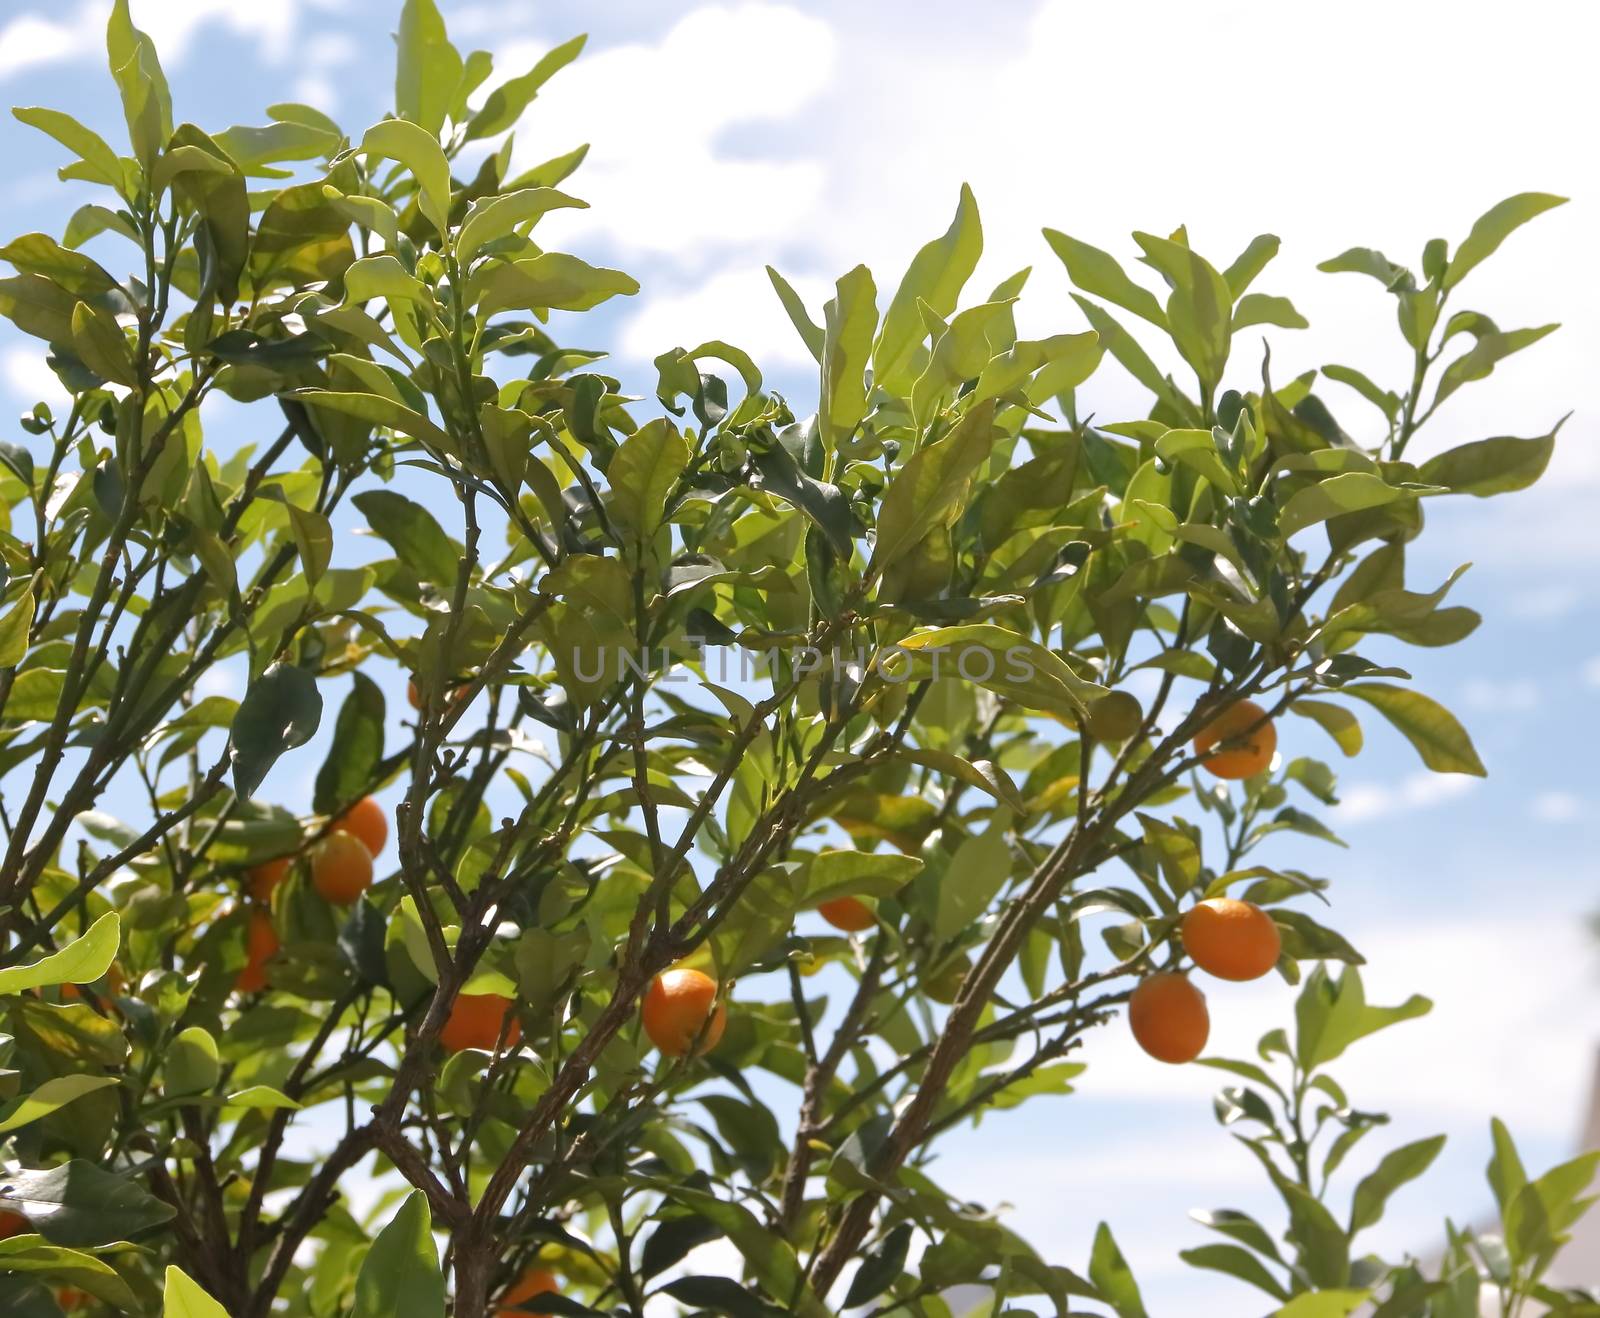 Cunquat fruits on the tree